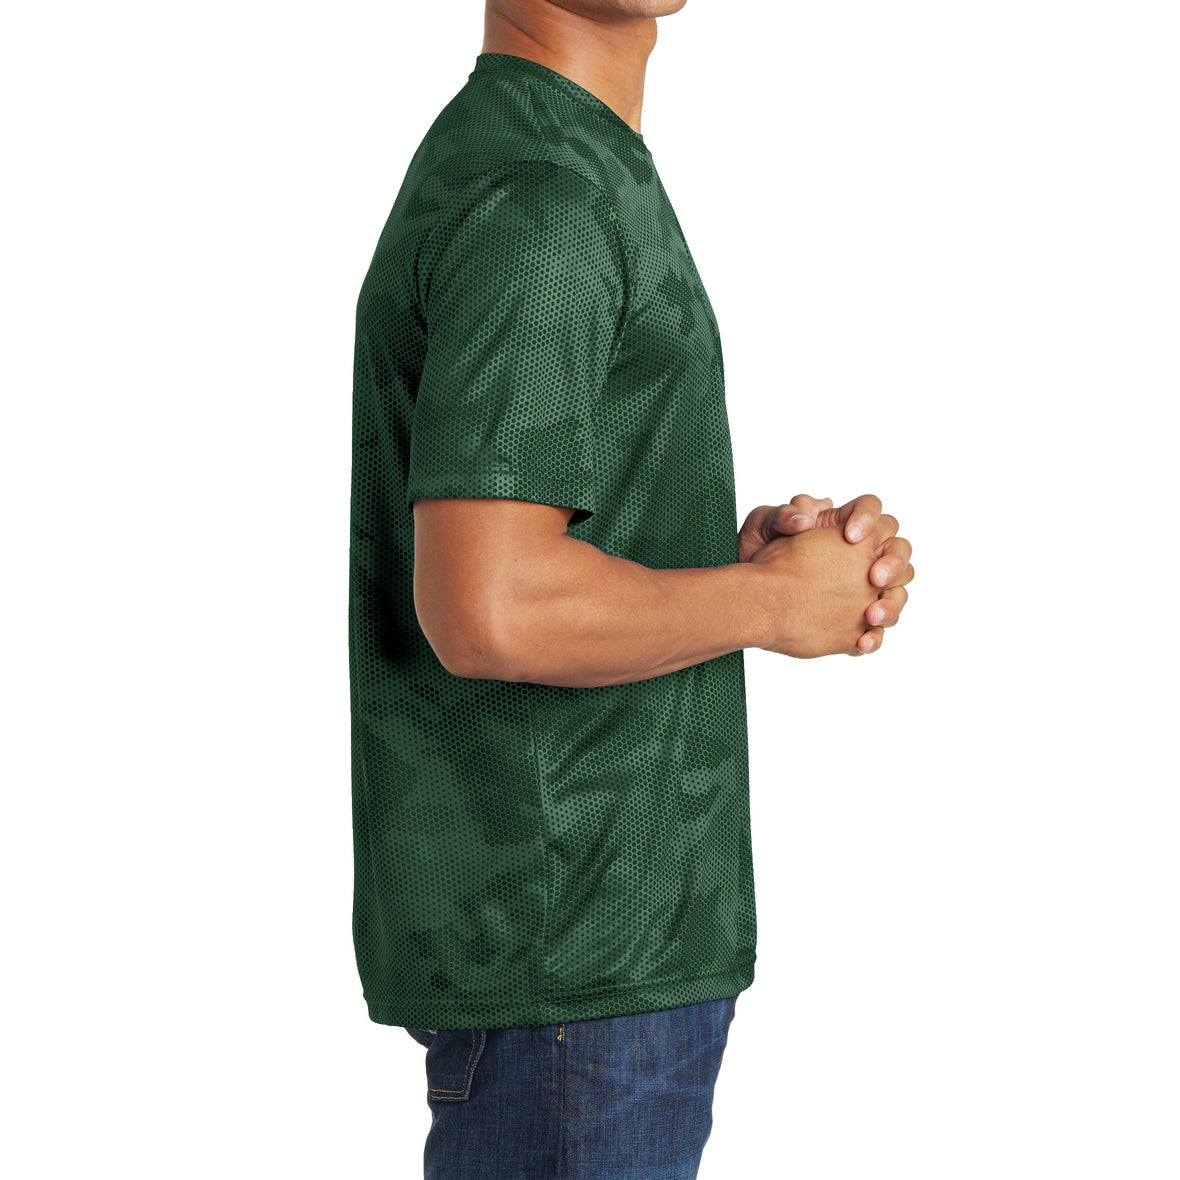 Moisture Wicking CamoHex Tee Shirt Forest Green Side